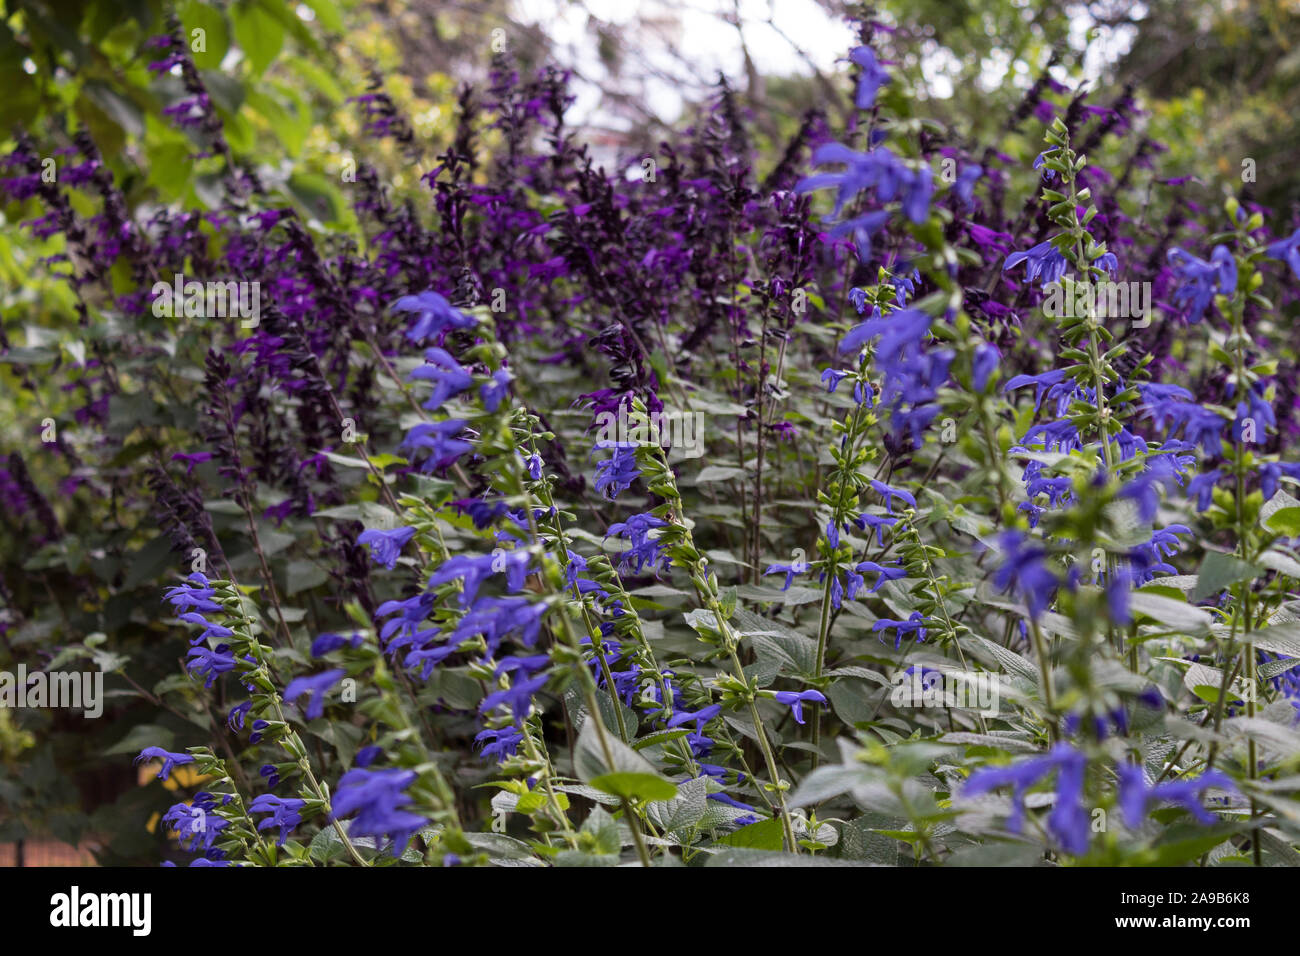 Blue and purple spring in Buenos Aires. Spring brings blue and purple blossom plants making every garden more colorful and interesting. Stock Photo